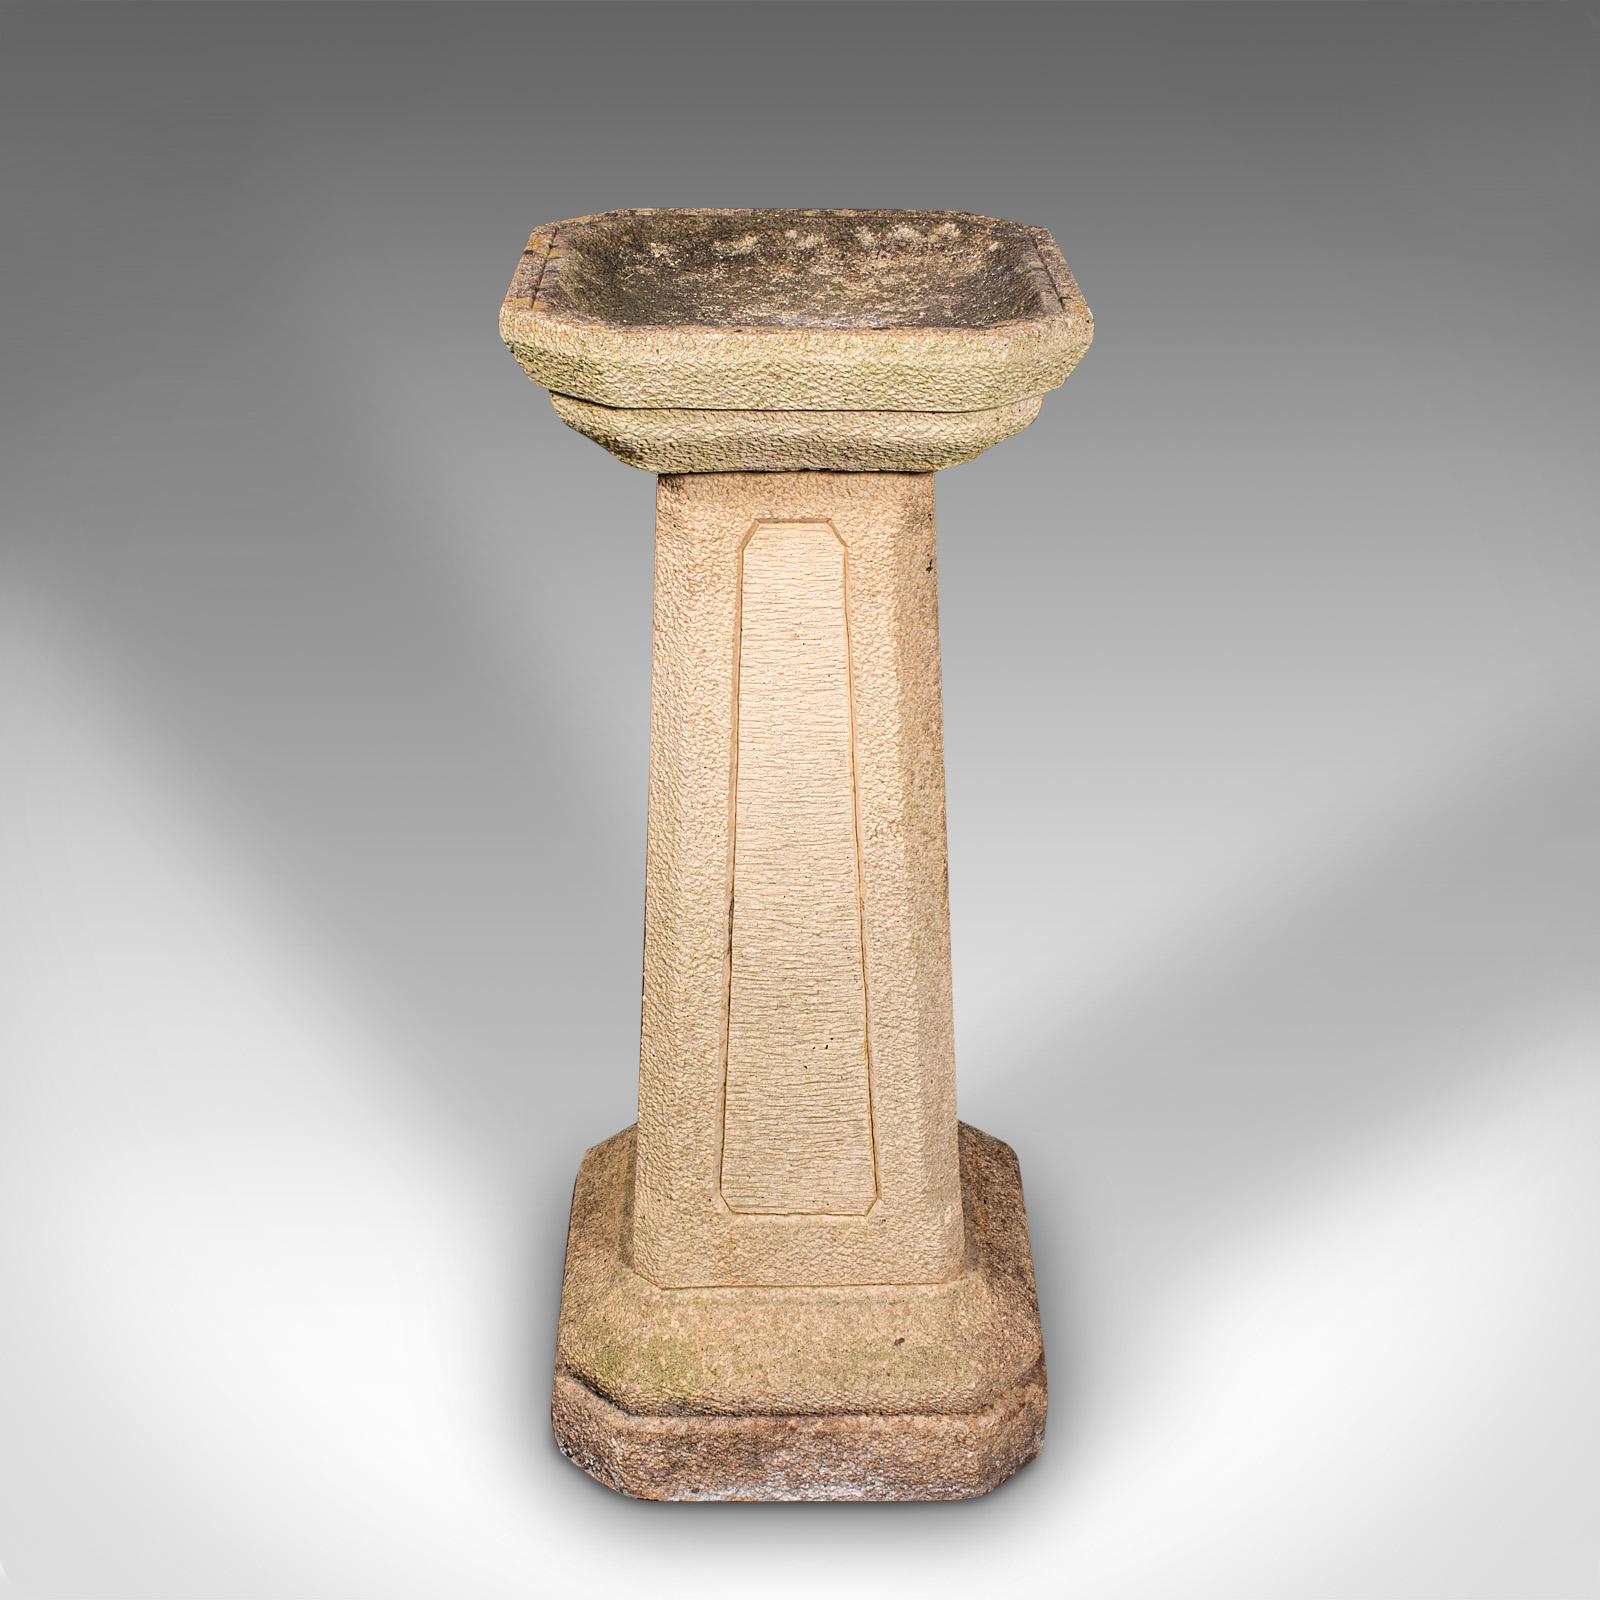 This is an antique garden bird bath. An English, reconstituted stone pedestal with inset trough, dating to the Edwardian period, circa 1910.

Pleasingly weathered appearance, to attract birds to the garden
Displaying a desirable aged patina with